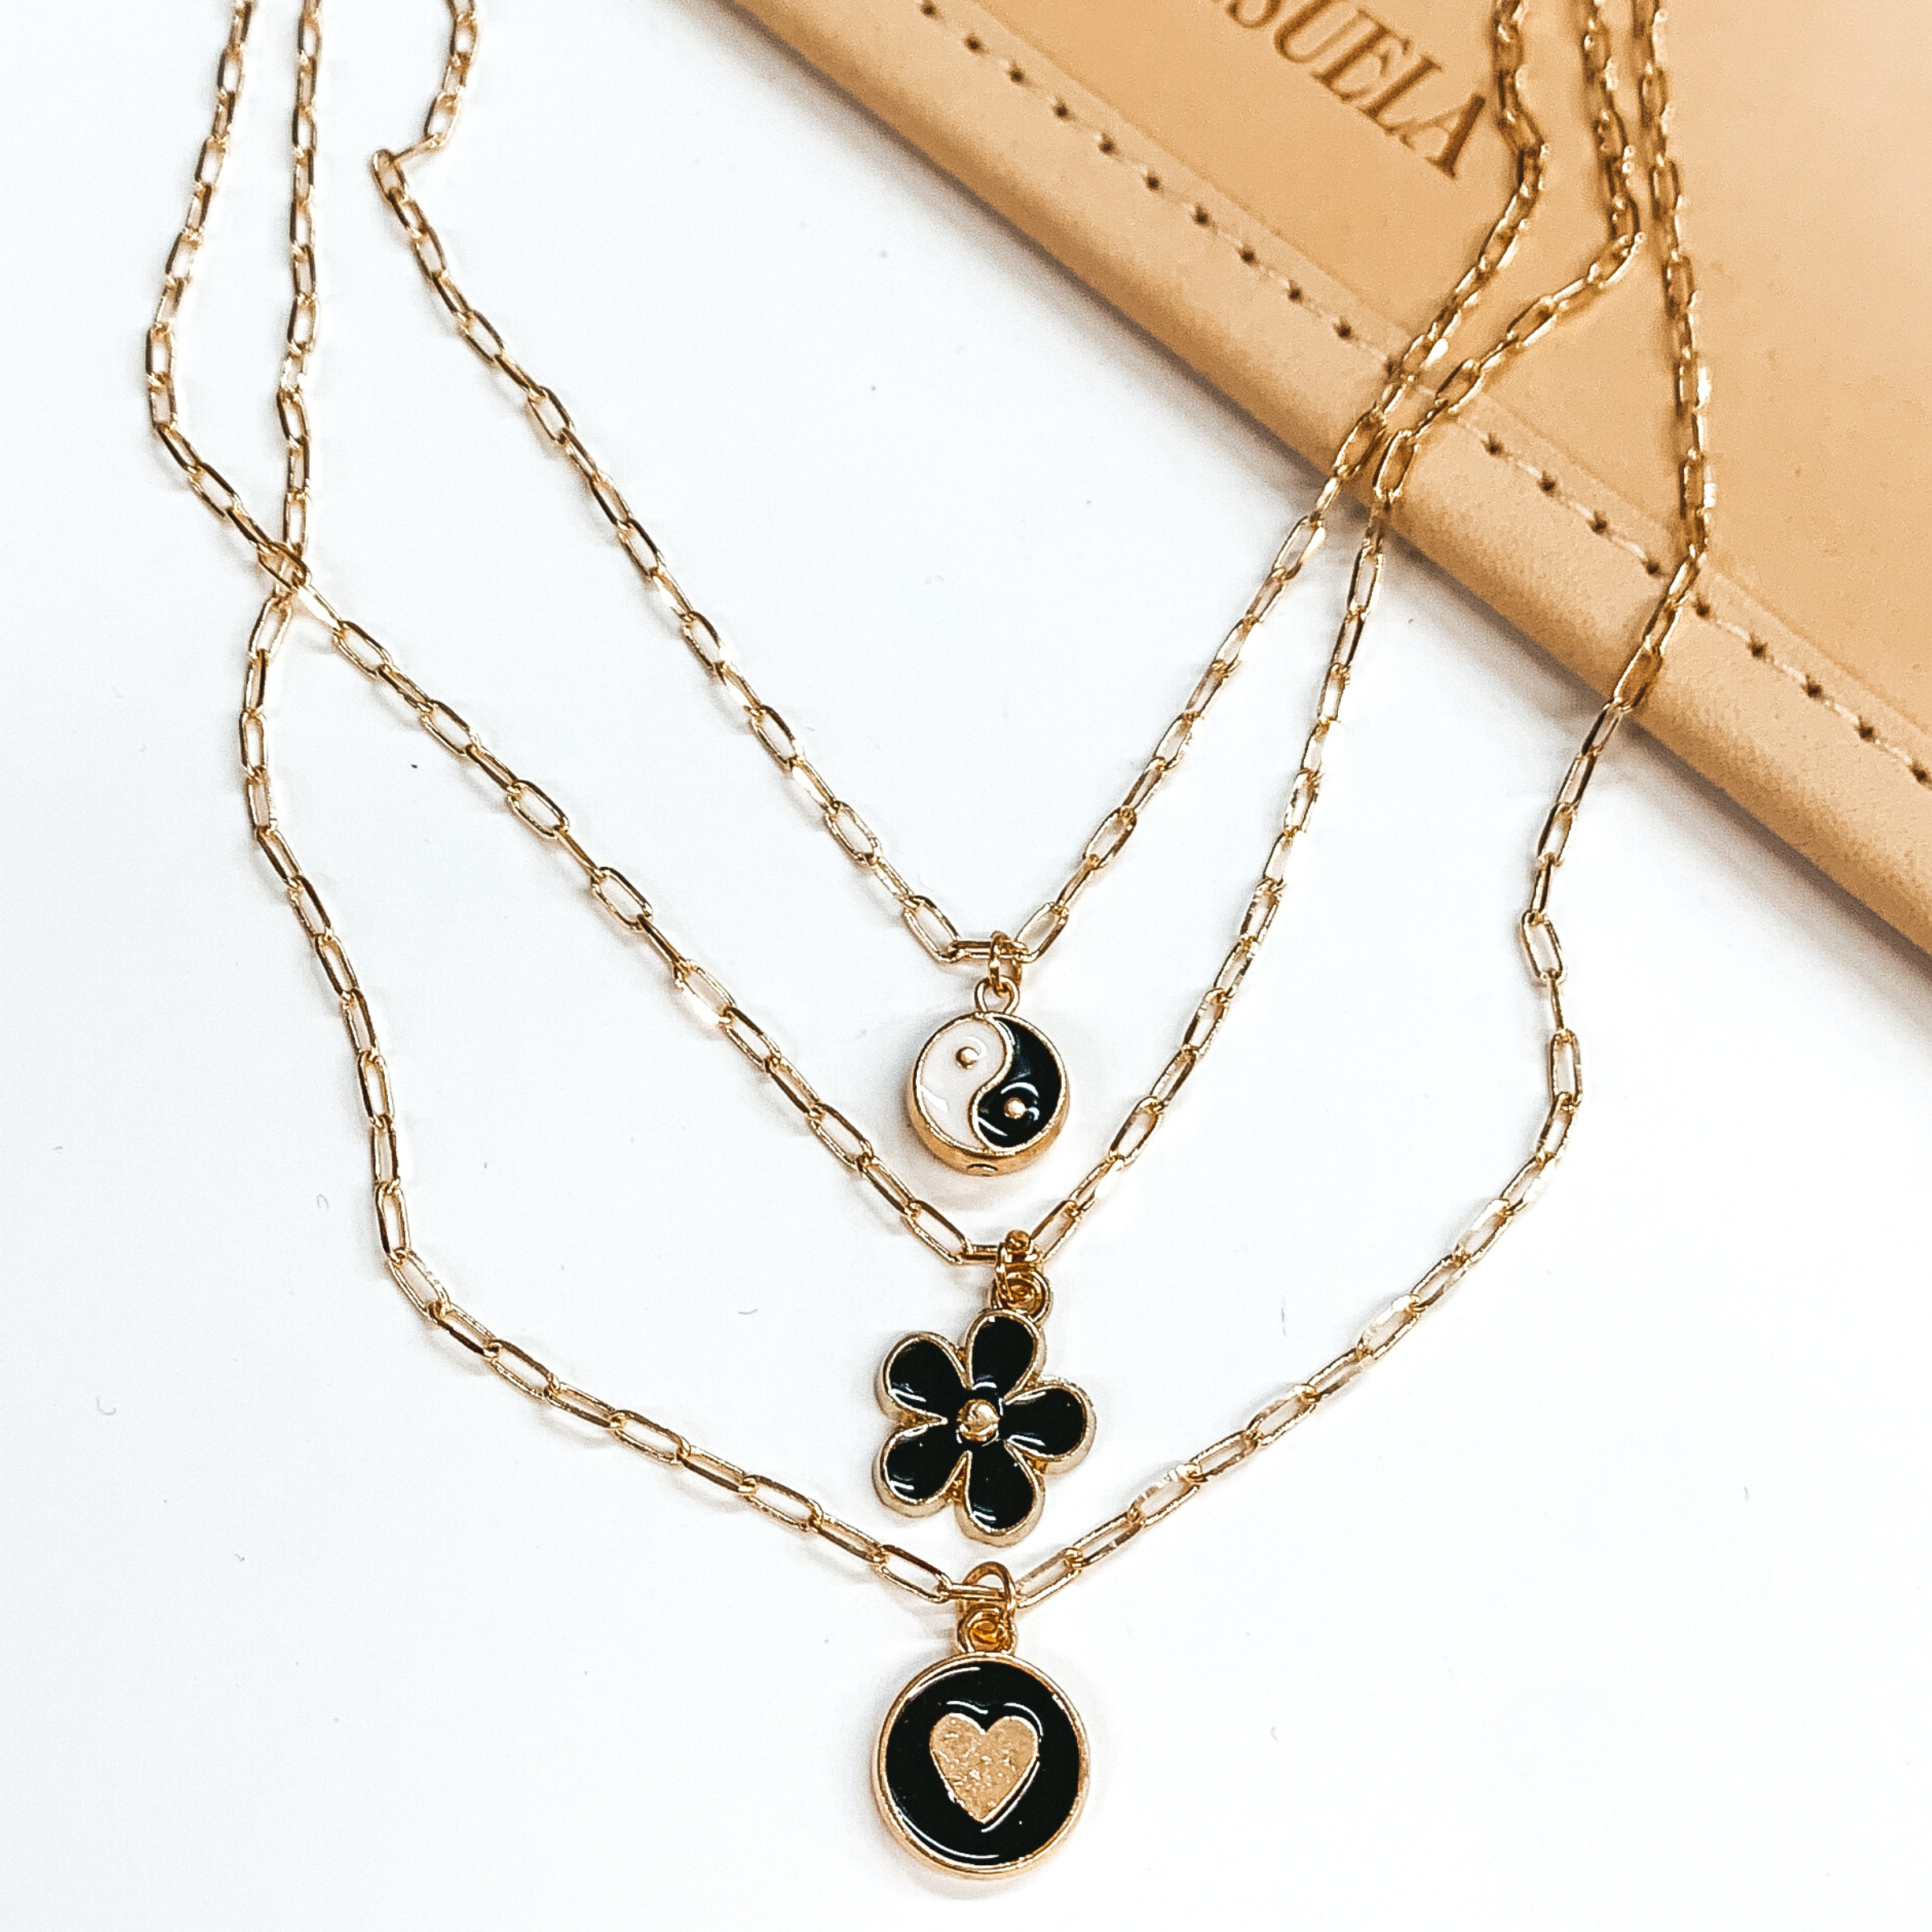 Three stranded gold chain necklace. Each strand has an individual charm in black, white, and/or gold. These include, a ying and yang circle charm, a flower charm, and a circle charm with a gold heart. This necklace is pictured partially on a tan bag on a white background. 